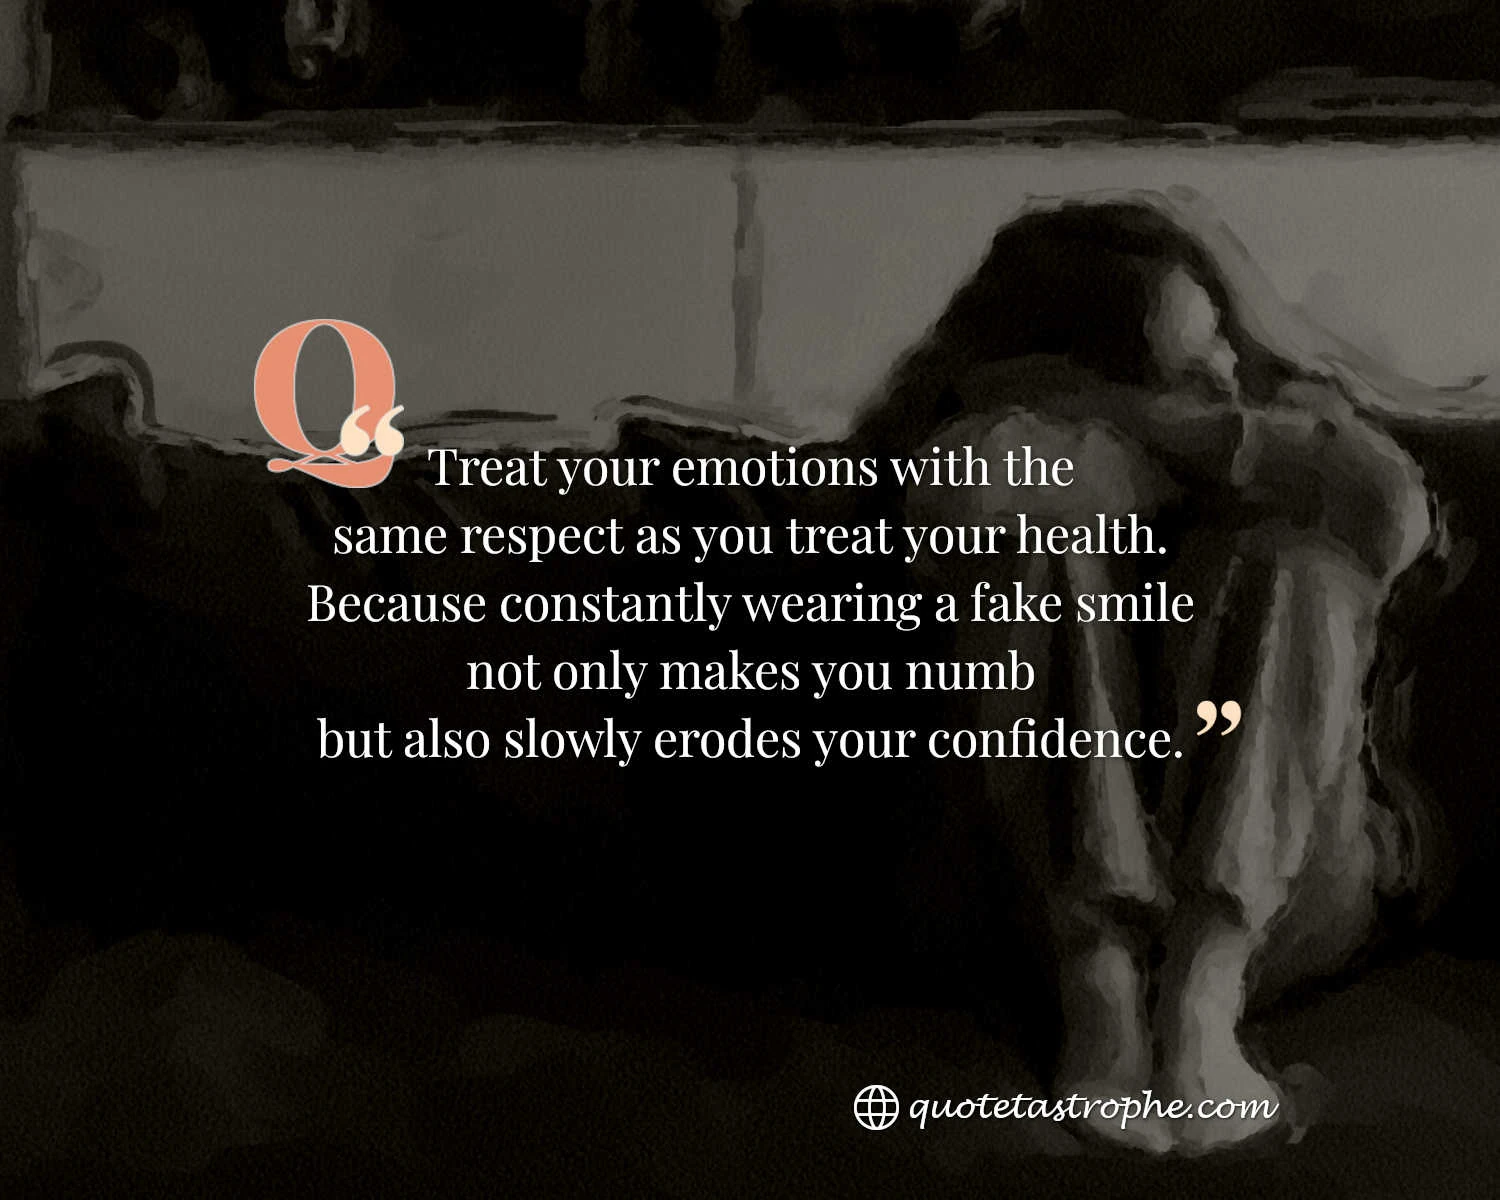 Treat Your Emotions With The Same Respect As Your Health